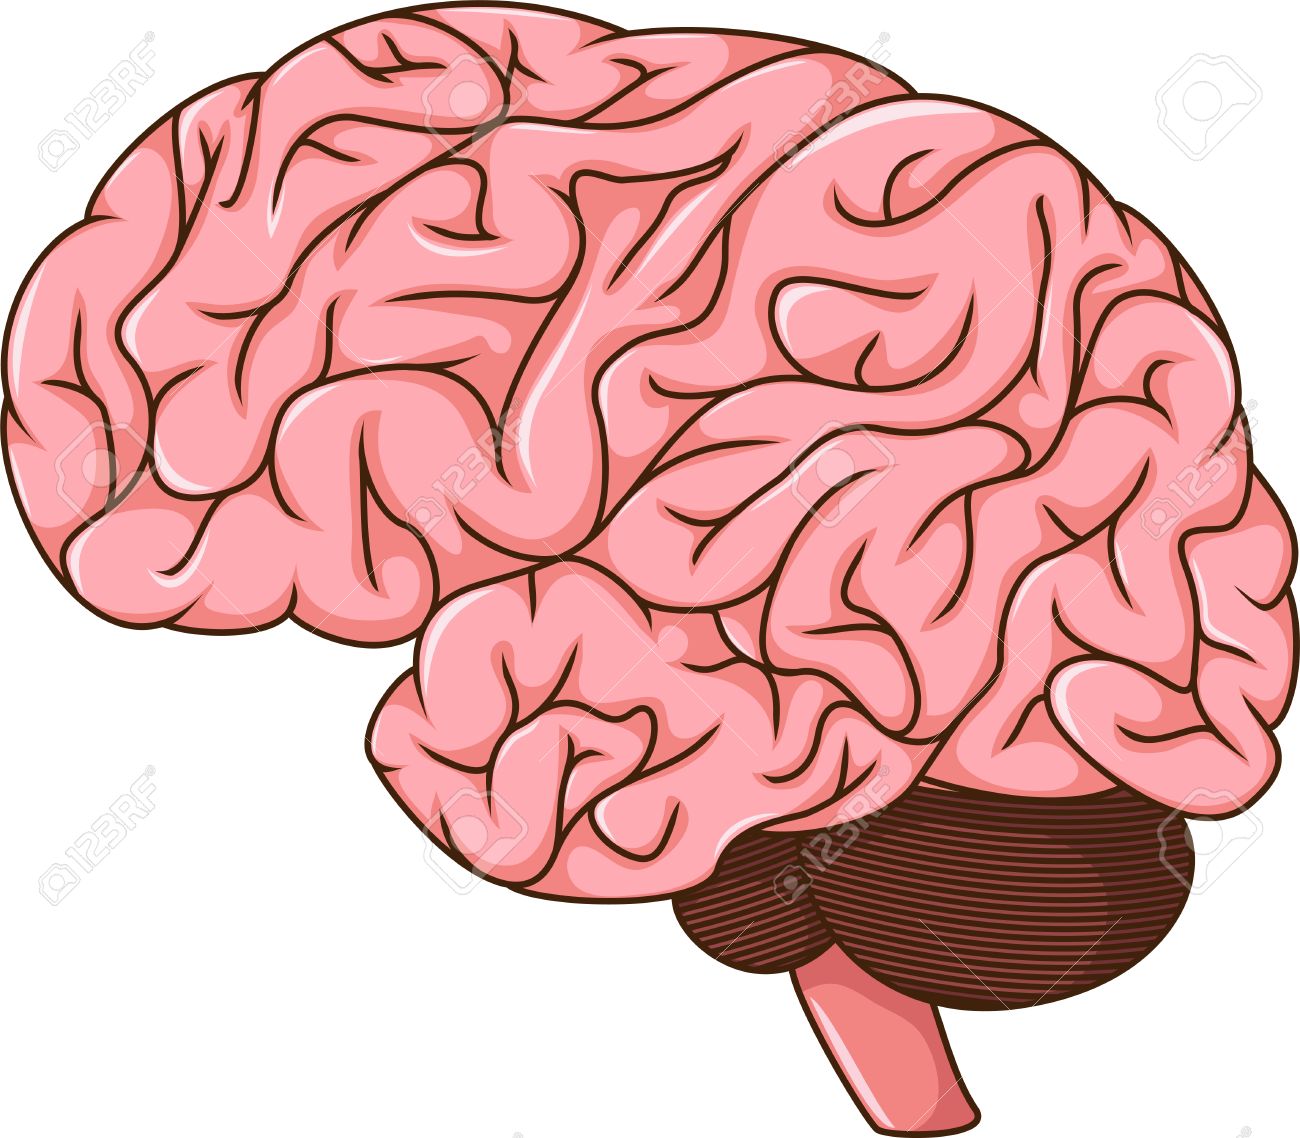 human brain pictures clipart 10 free Cliparts | Download images on